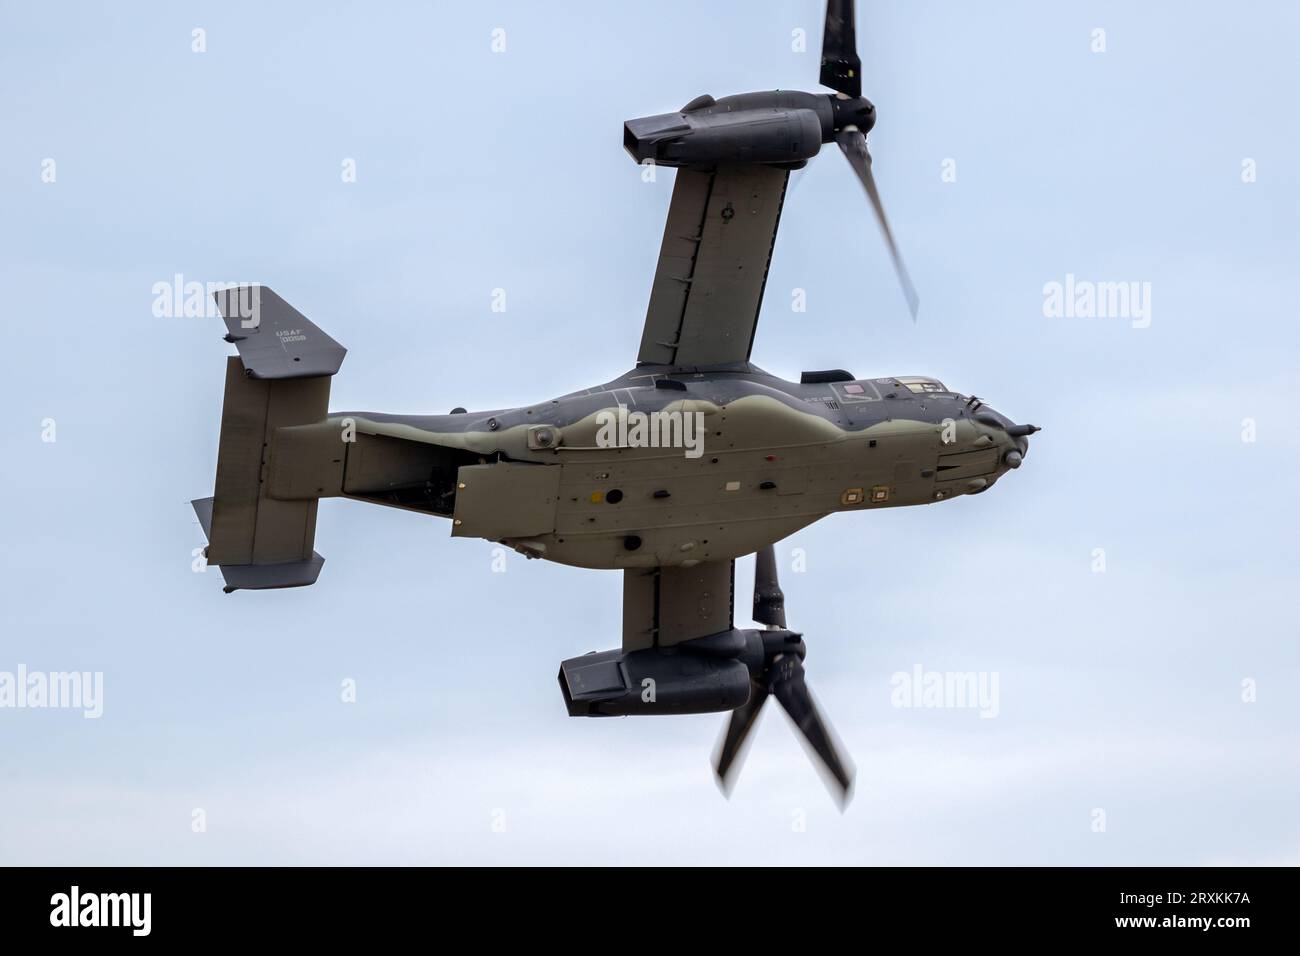 Us Air Force Bell Boeing V-22 Osprey Tiltrotor Military Aircraft In Flight. Uk - July 13, 2018 Stock Photo